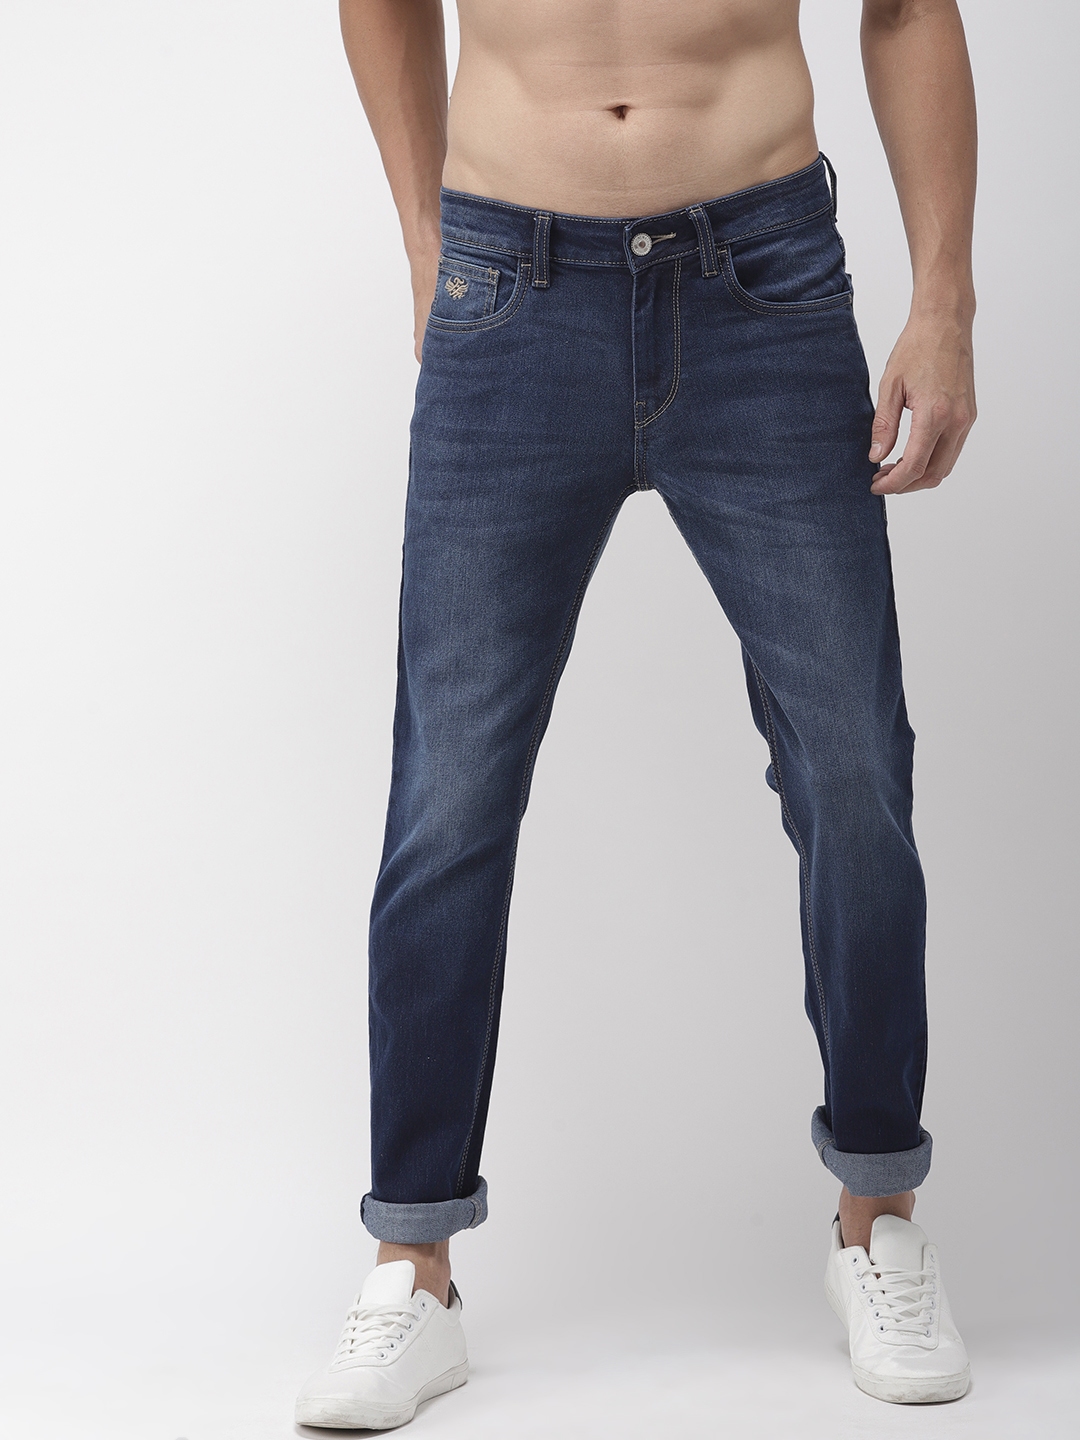 slim tapered jeans meaning